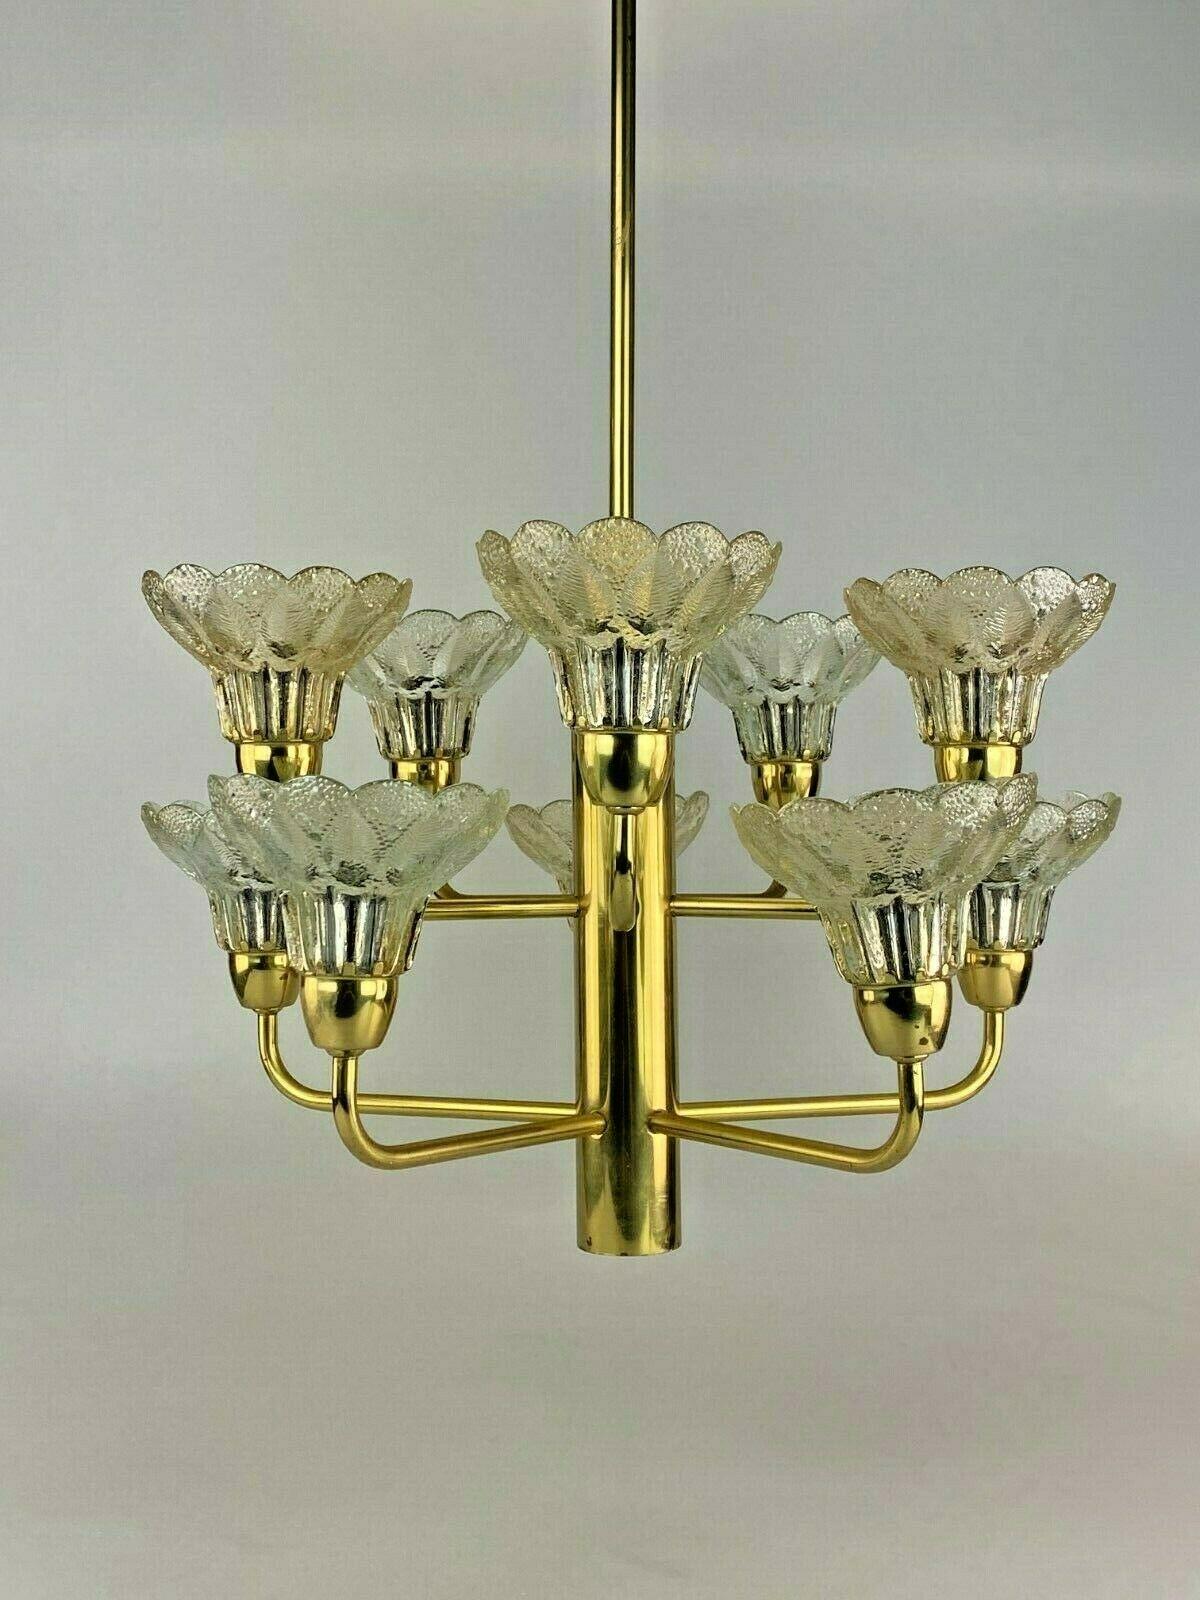 60s 70s Lamp Fixture Ceiling Lamp Chandelier Chandelier Glass Space Age

Object: chandelier

Manufacturer:

Condition: good

Age: around 1960-1970

Dimensions:

Diameter = 46cm
Hanging height = 83cm

Other notes:

The pictures serve